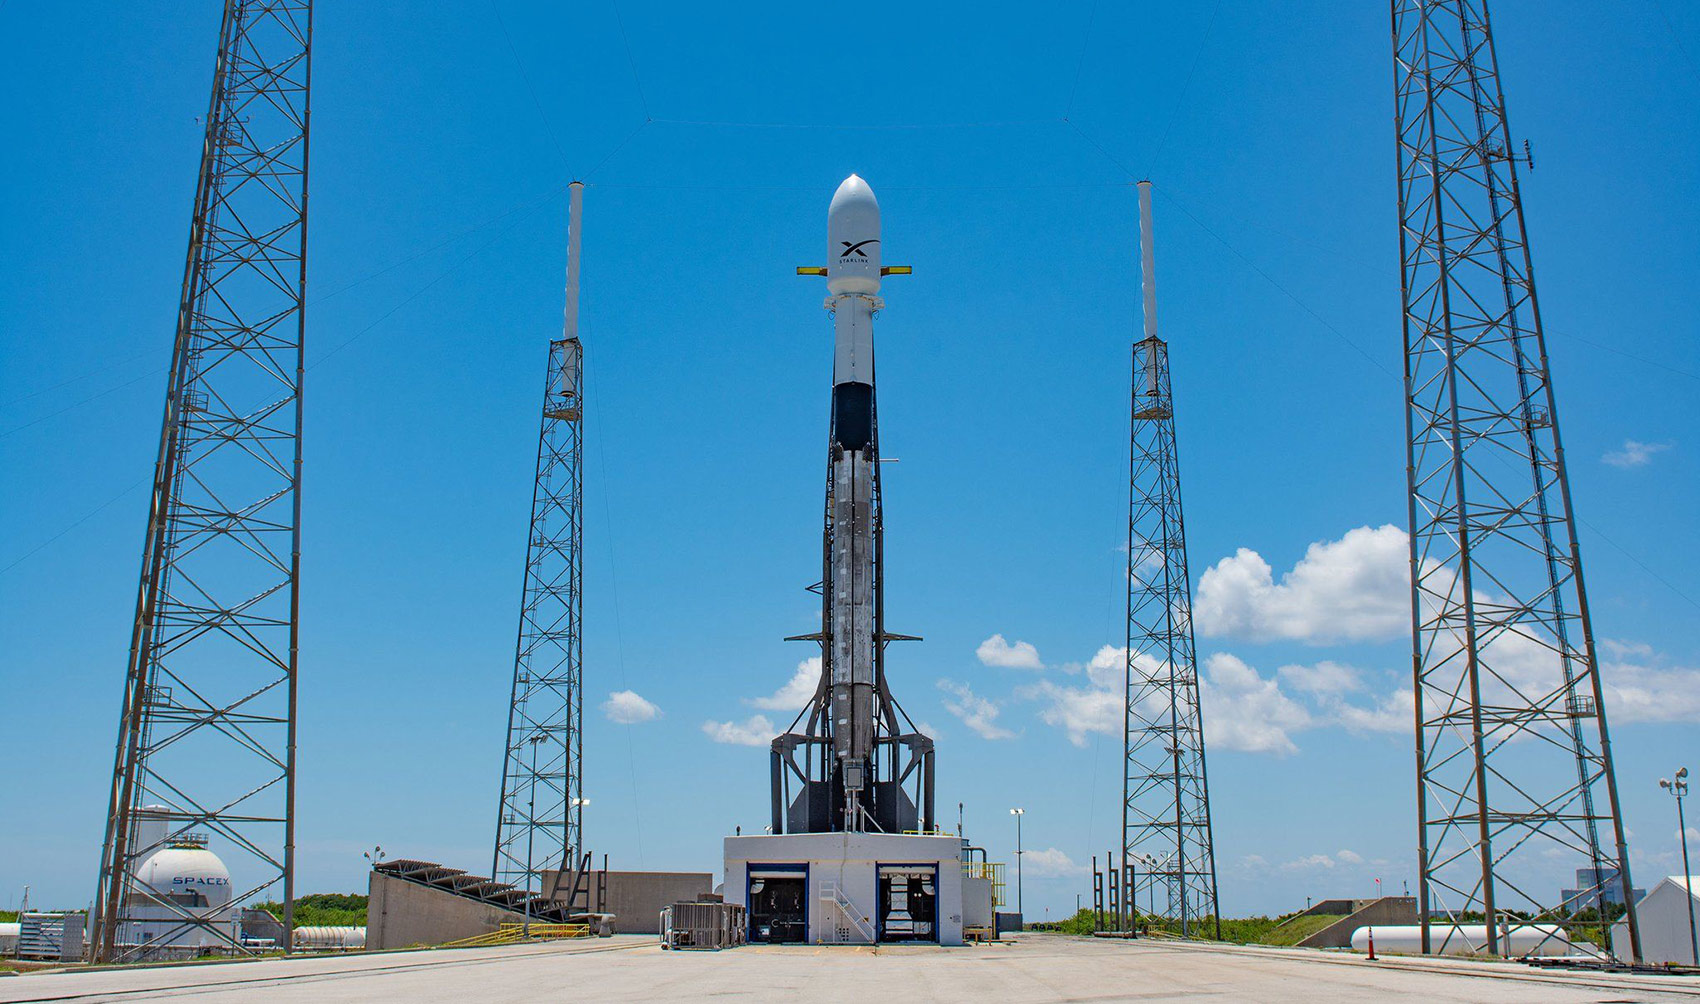 Falcon 9 at the launch pad.